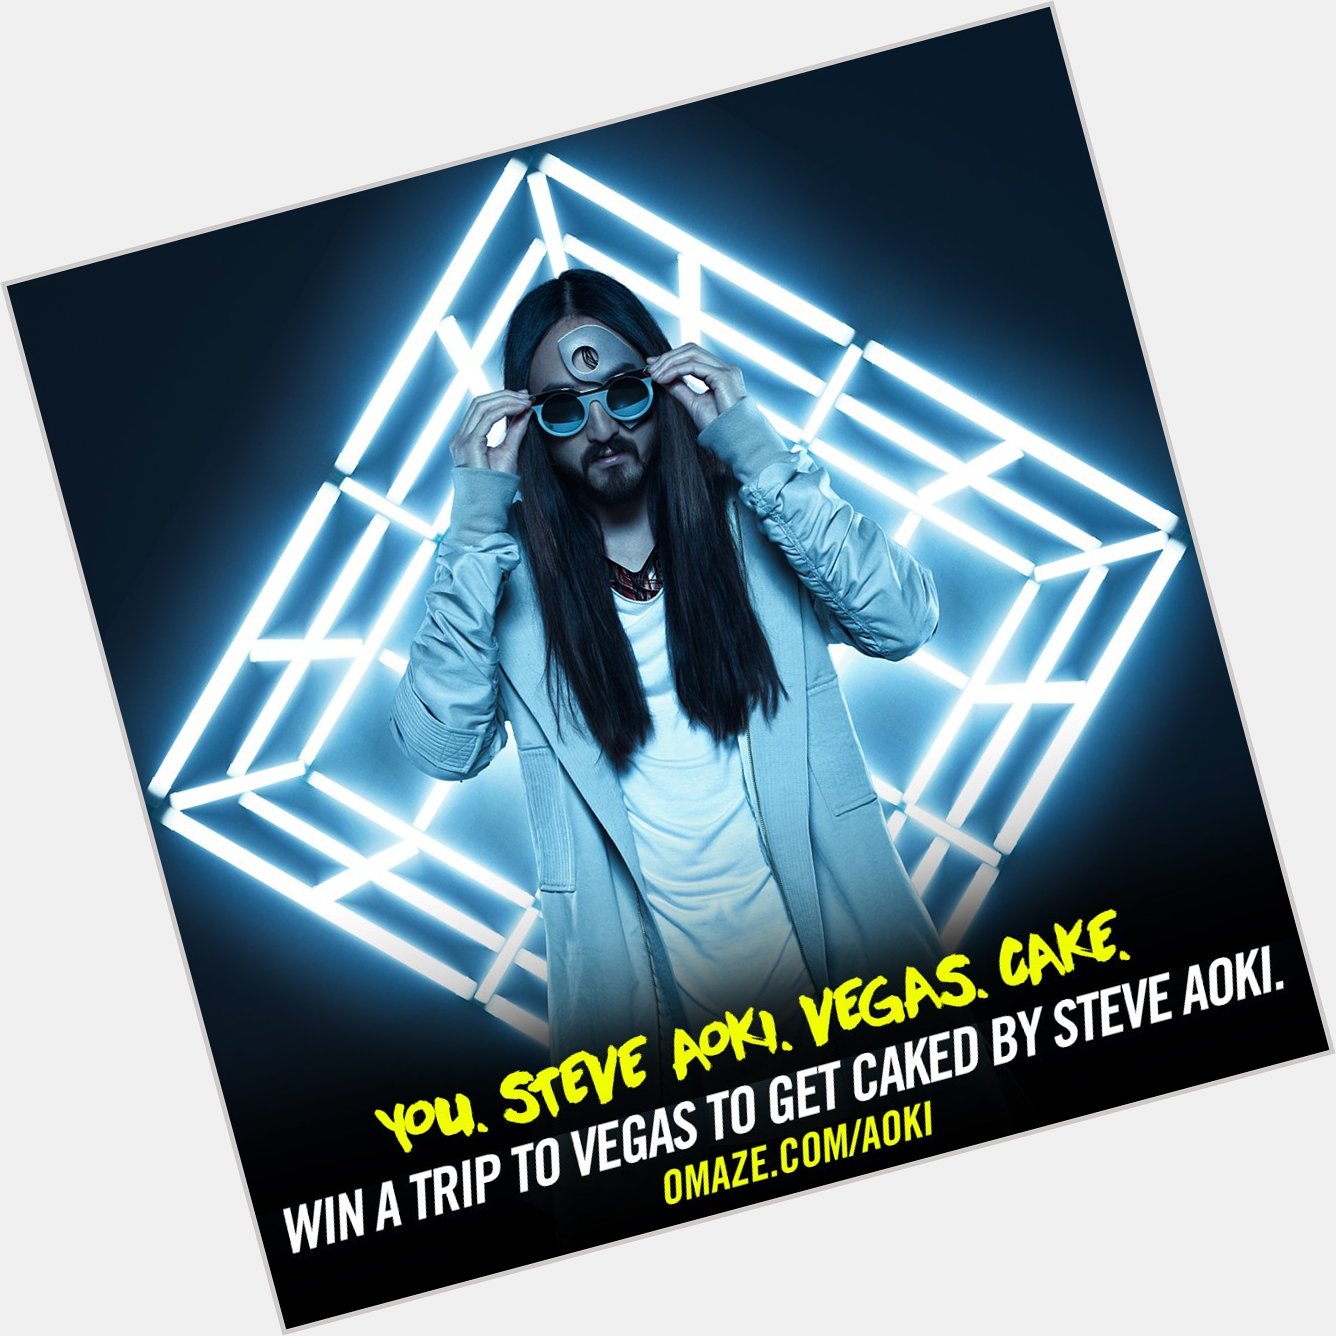 Happy Birthday to Steve Aoki! Celebrate & enter to be his VIP in Vegas + get caked! ENTER:  